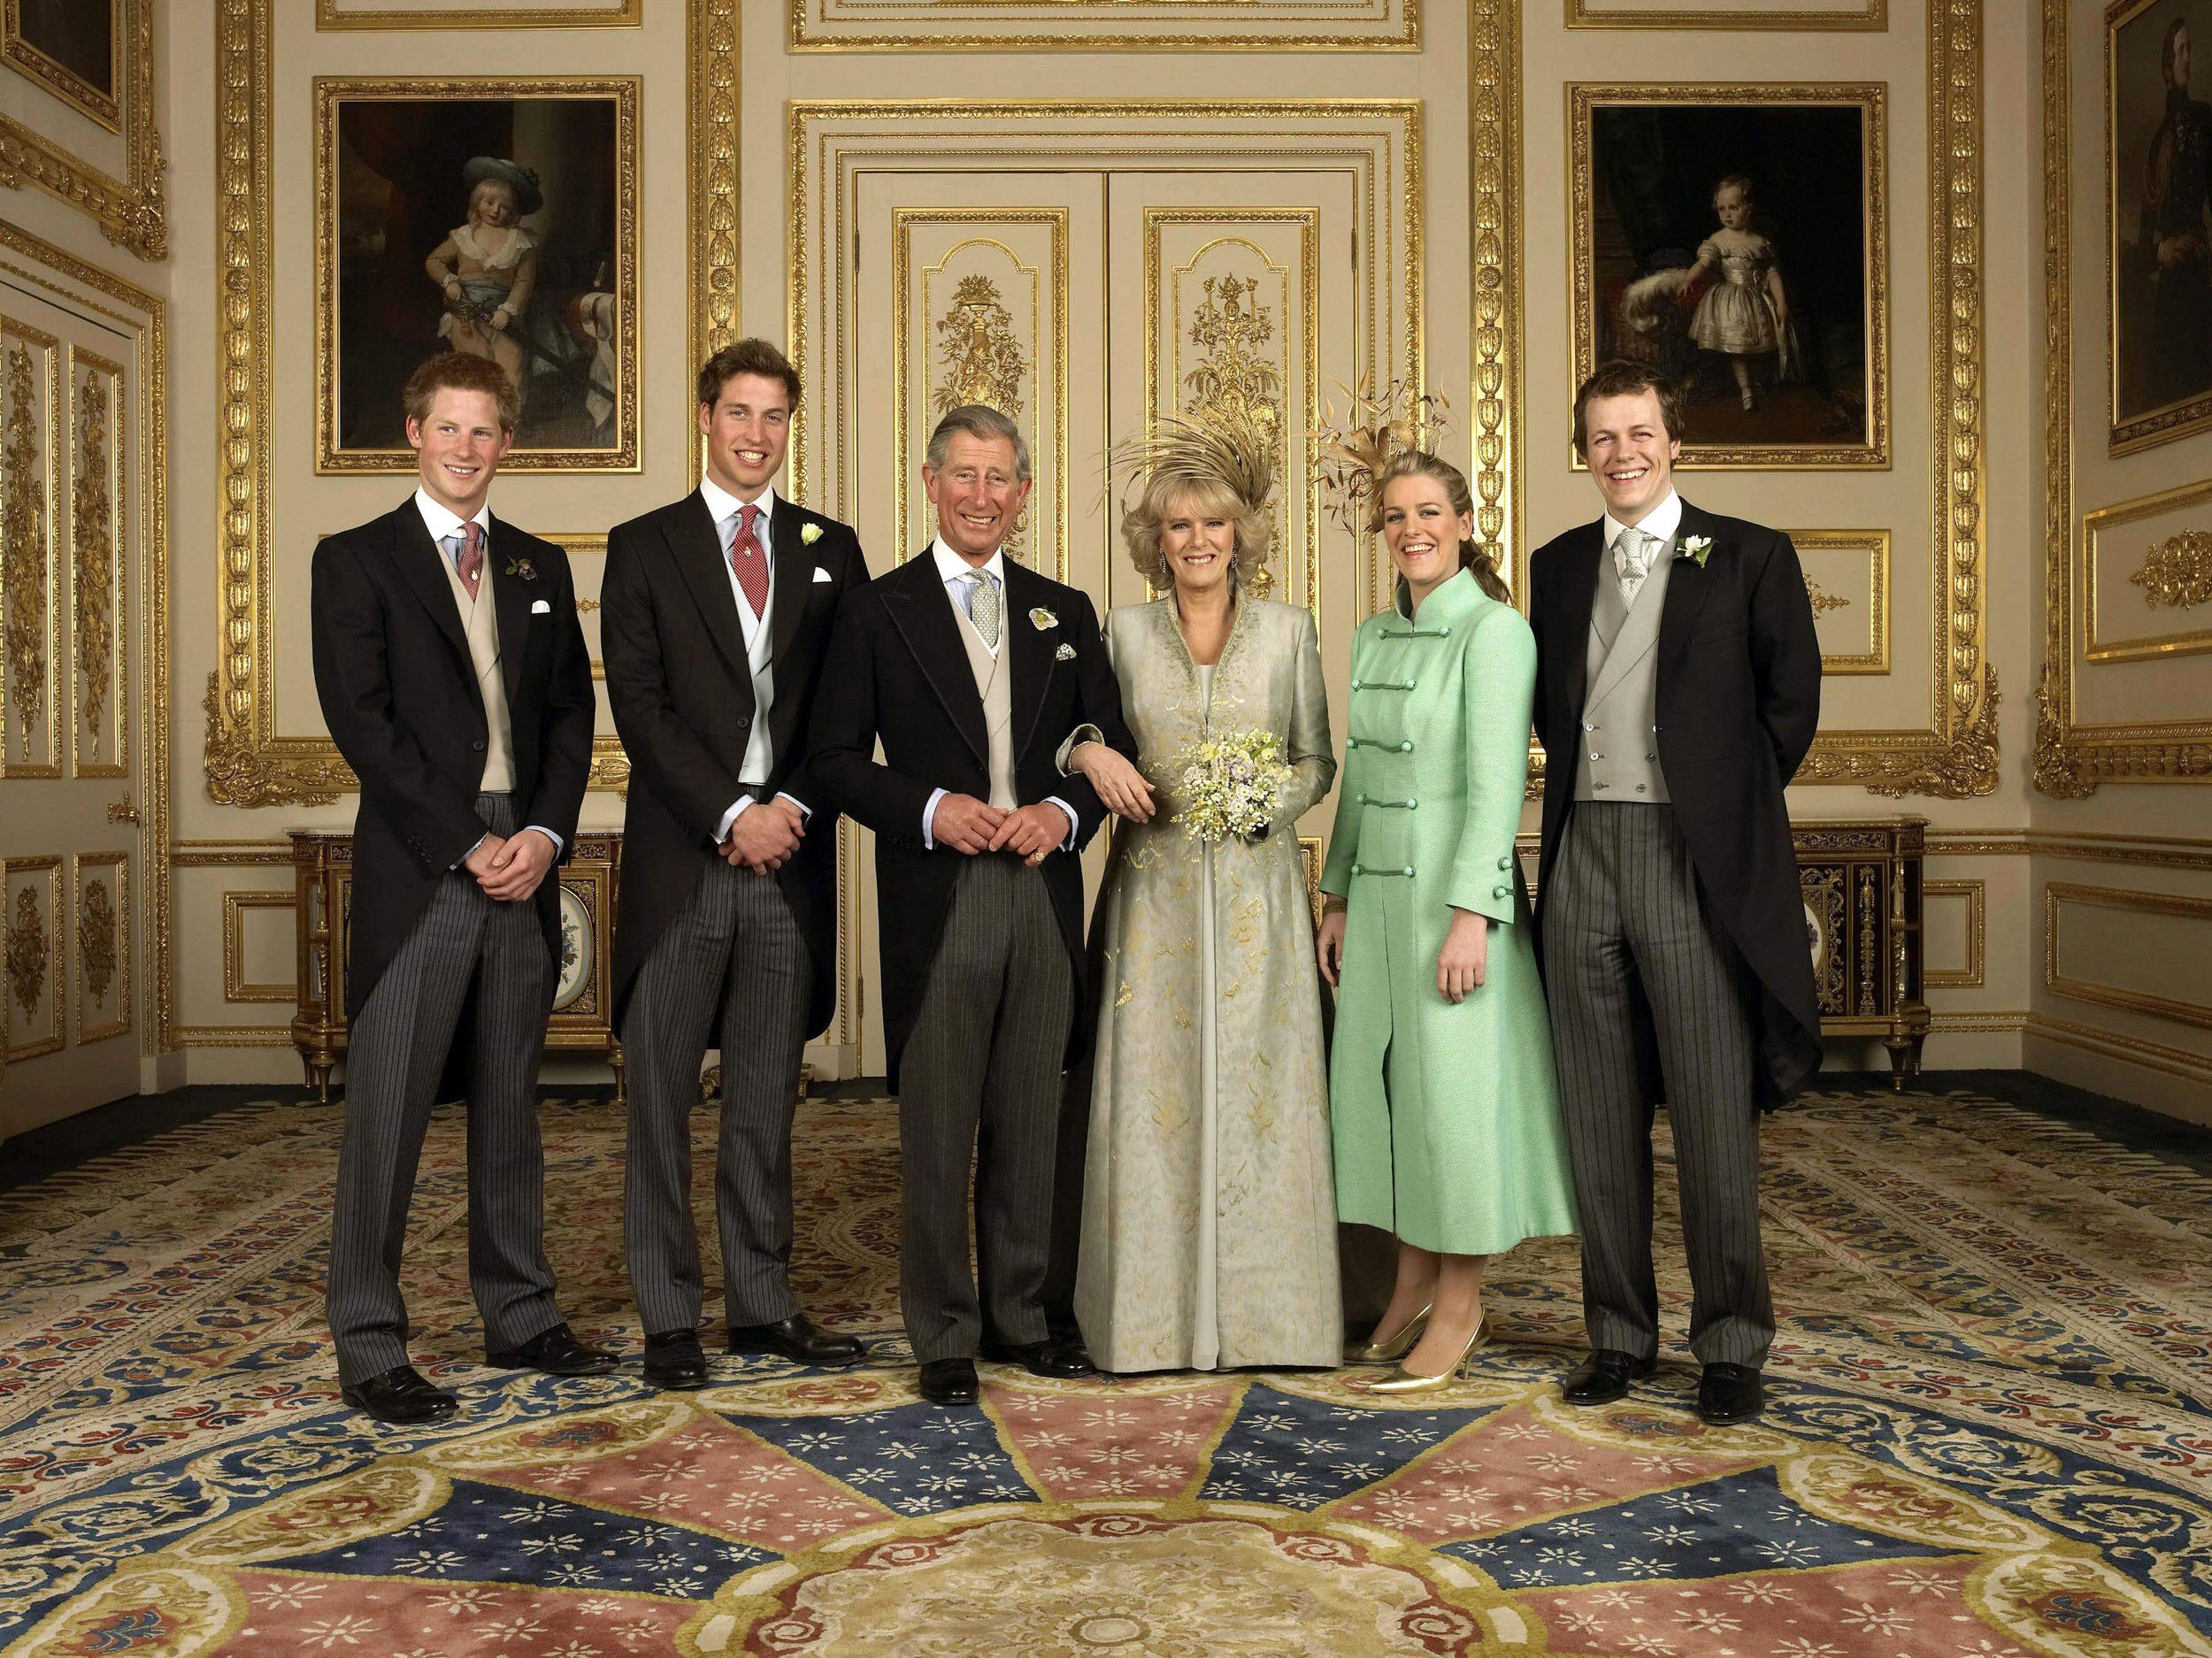  Picture of Prince Harry, and Prince William, Camilla's children Laura and Tom Parker Bowles, with Charles and Camilla in the White Drawing Room at Windsor Castle | Source: Getty Images